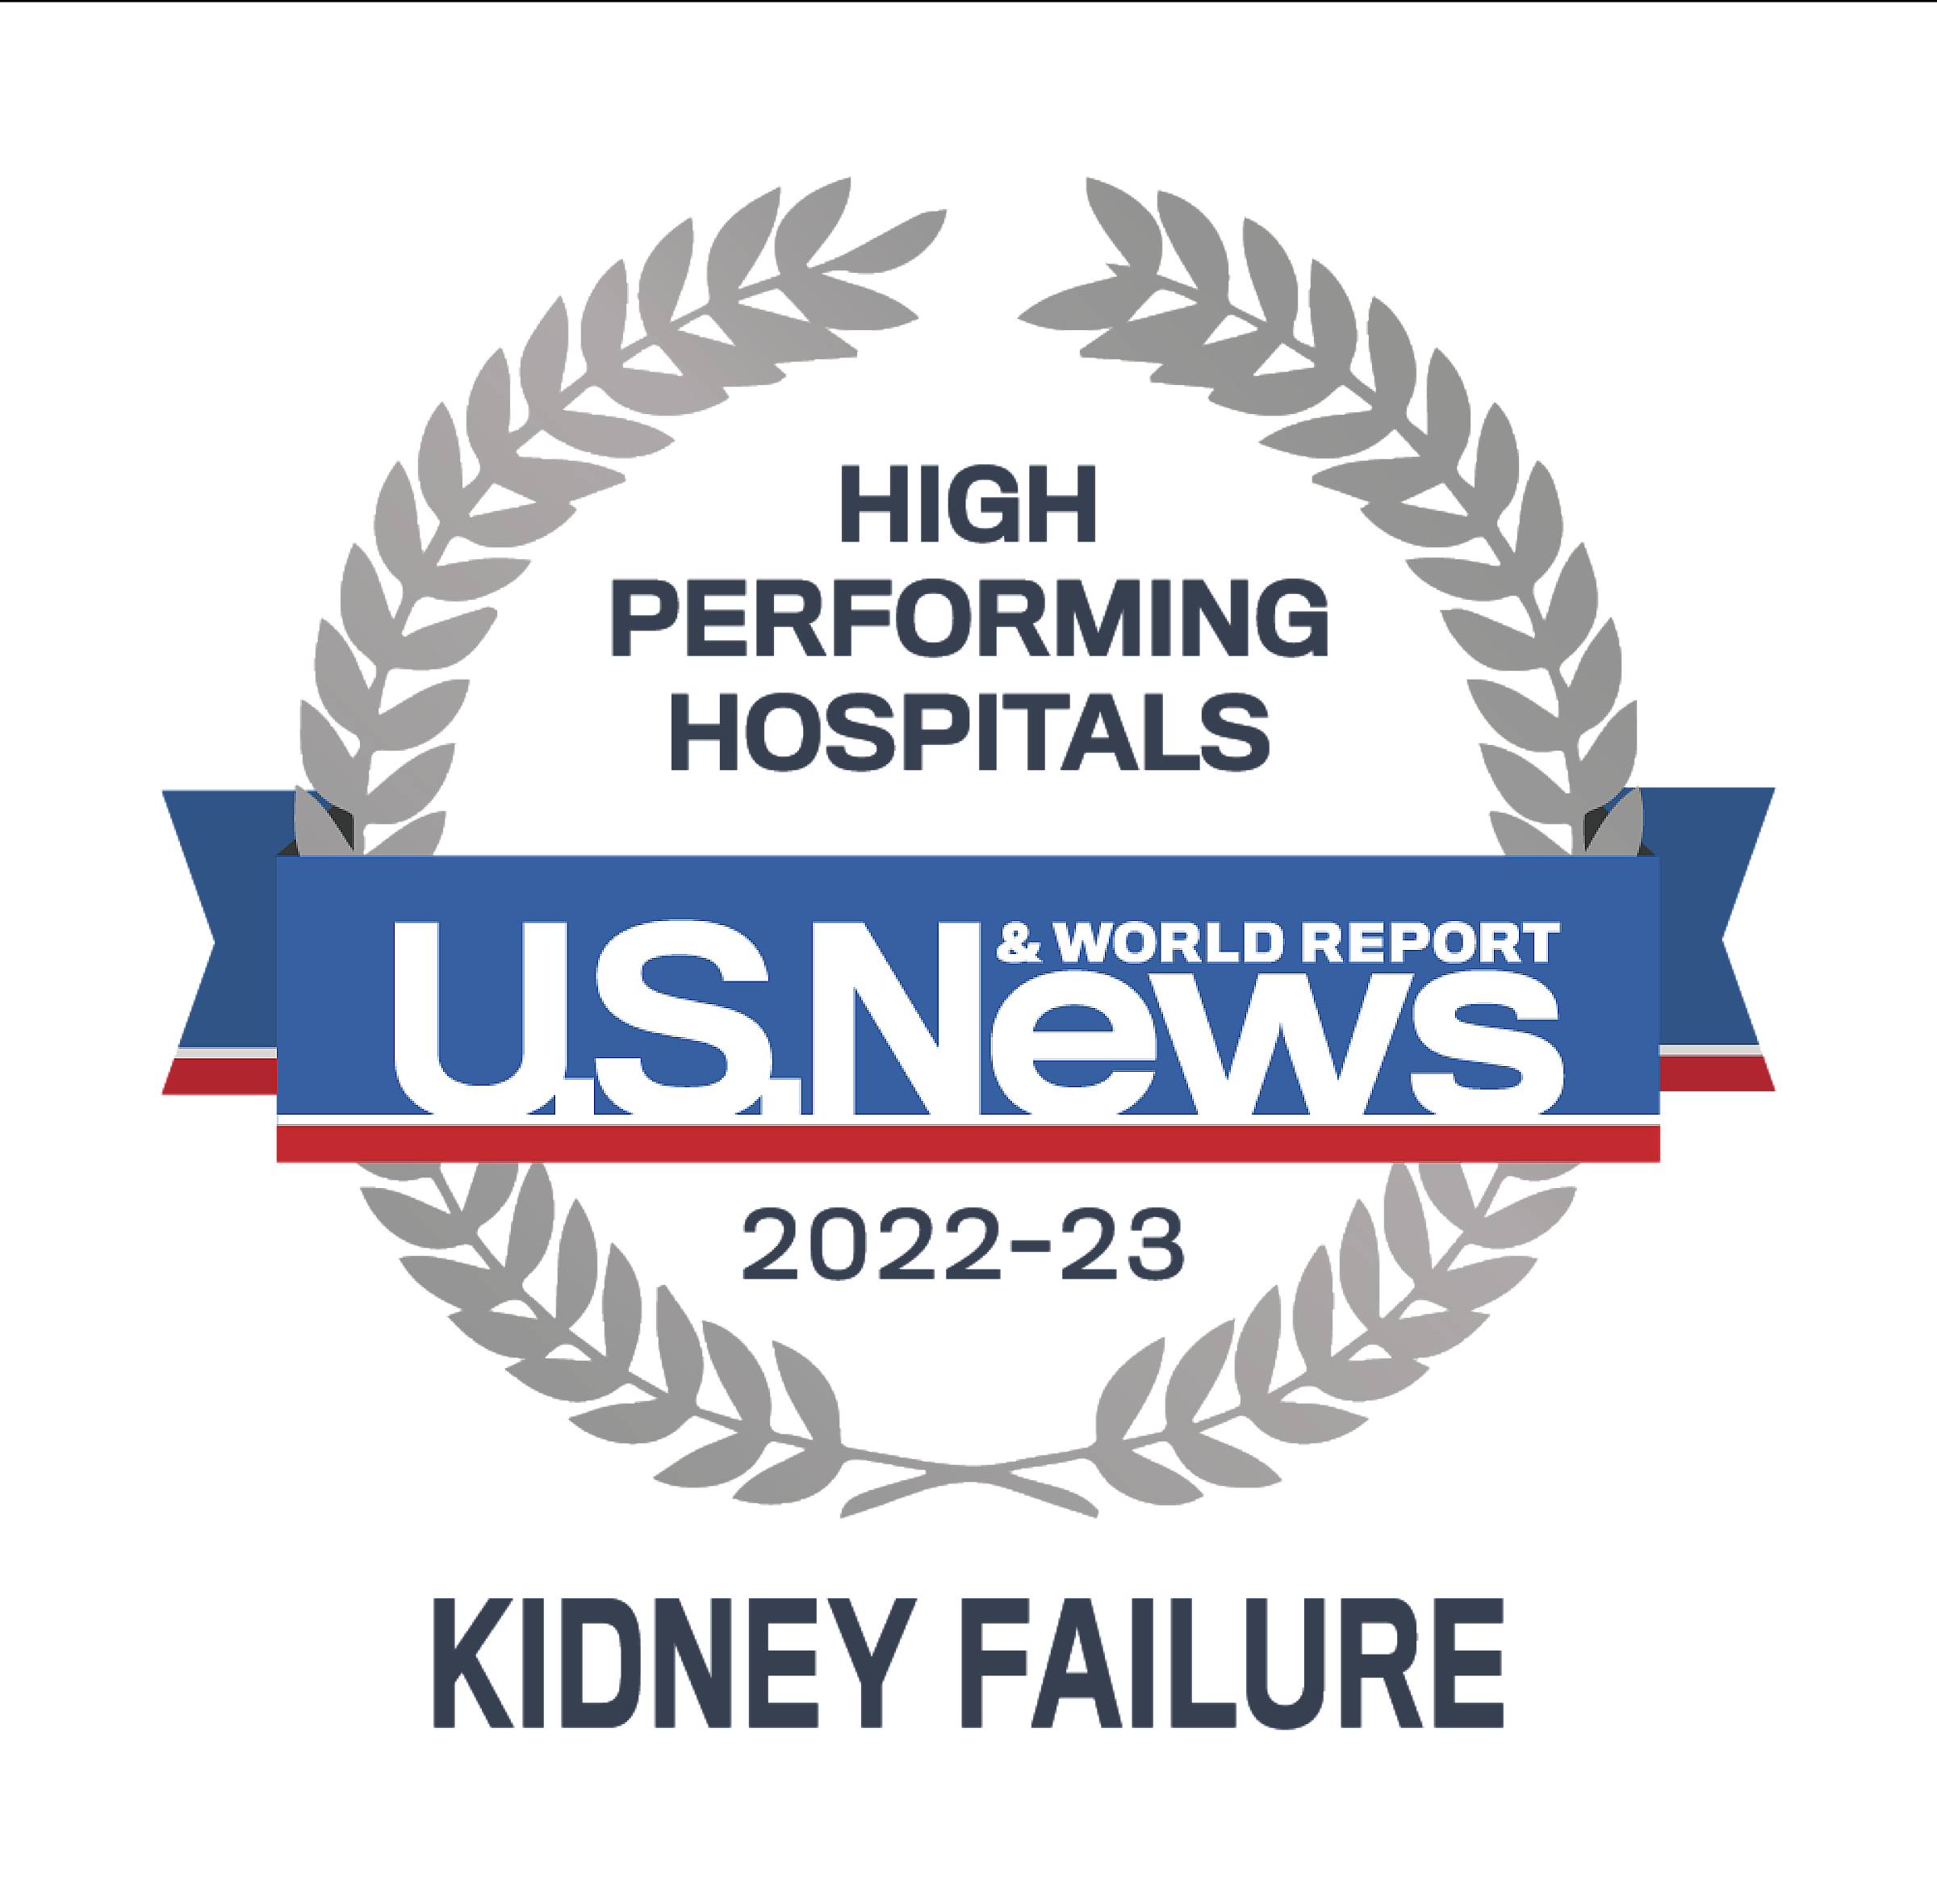 US News & World Report high performing care for kidney failure 2022-2023